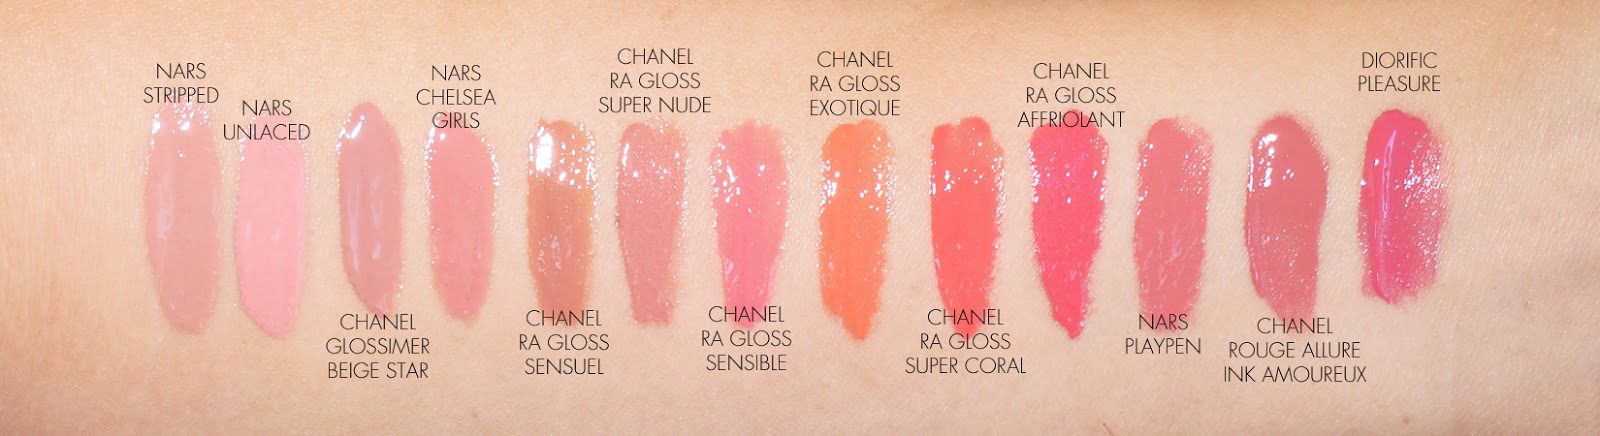 The Beauty Look Book - Chanel Rouge Allure Gloss comparisons